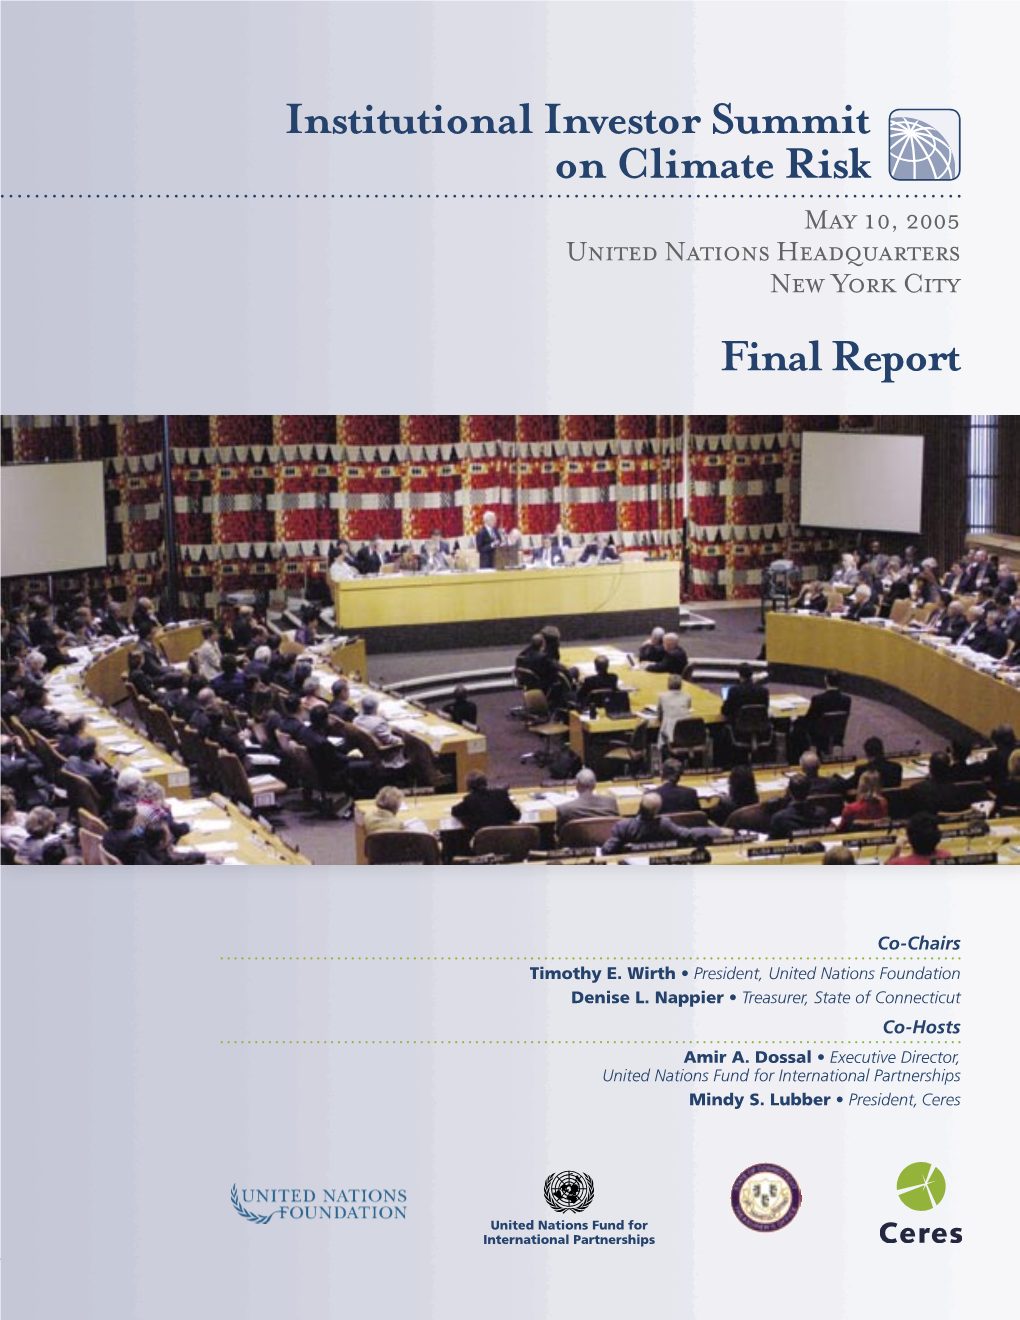 Institutional Investor Summit on Climate Risk Final Report